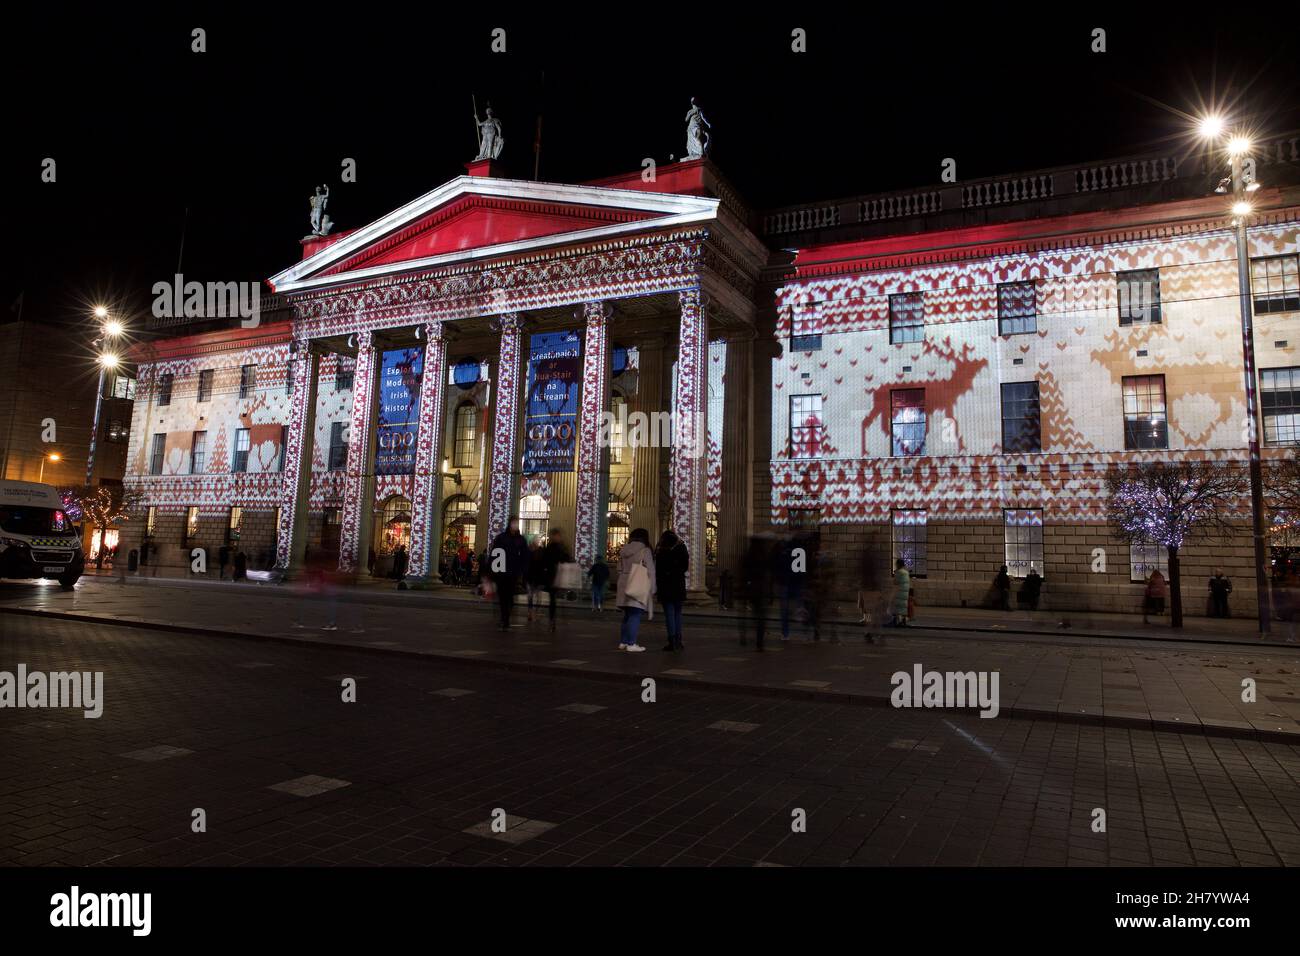 Dublin, Ireland - November 24, 2021: the General Post Office on O'Connell Street, illuminated in Christmas lights. Stock Photo